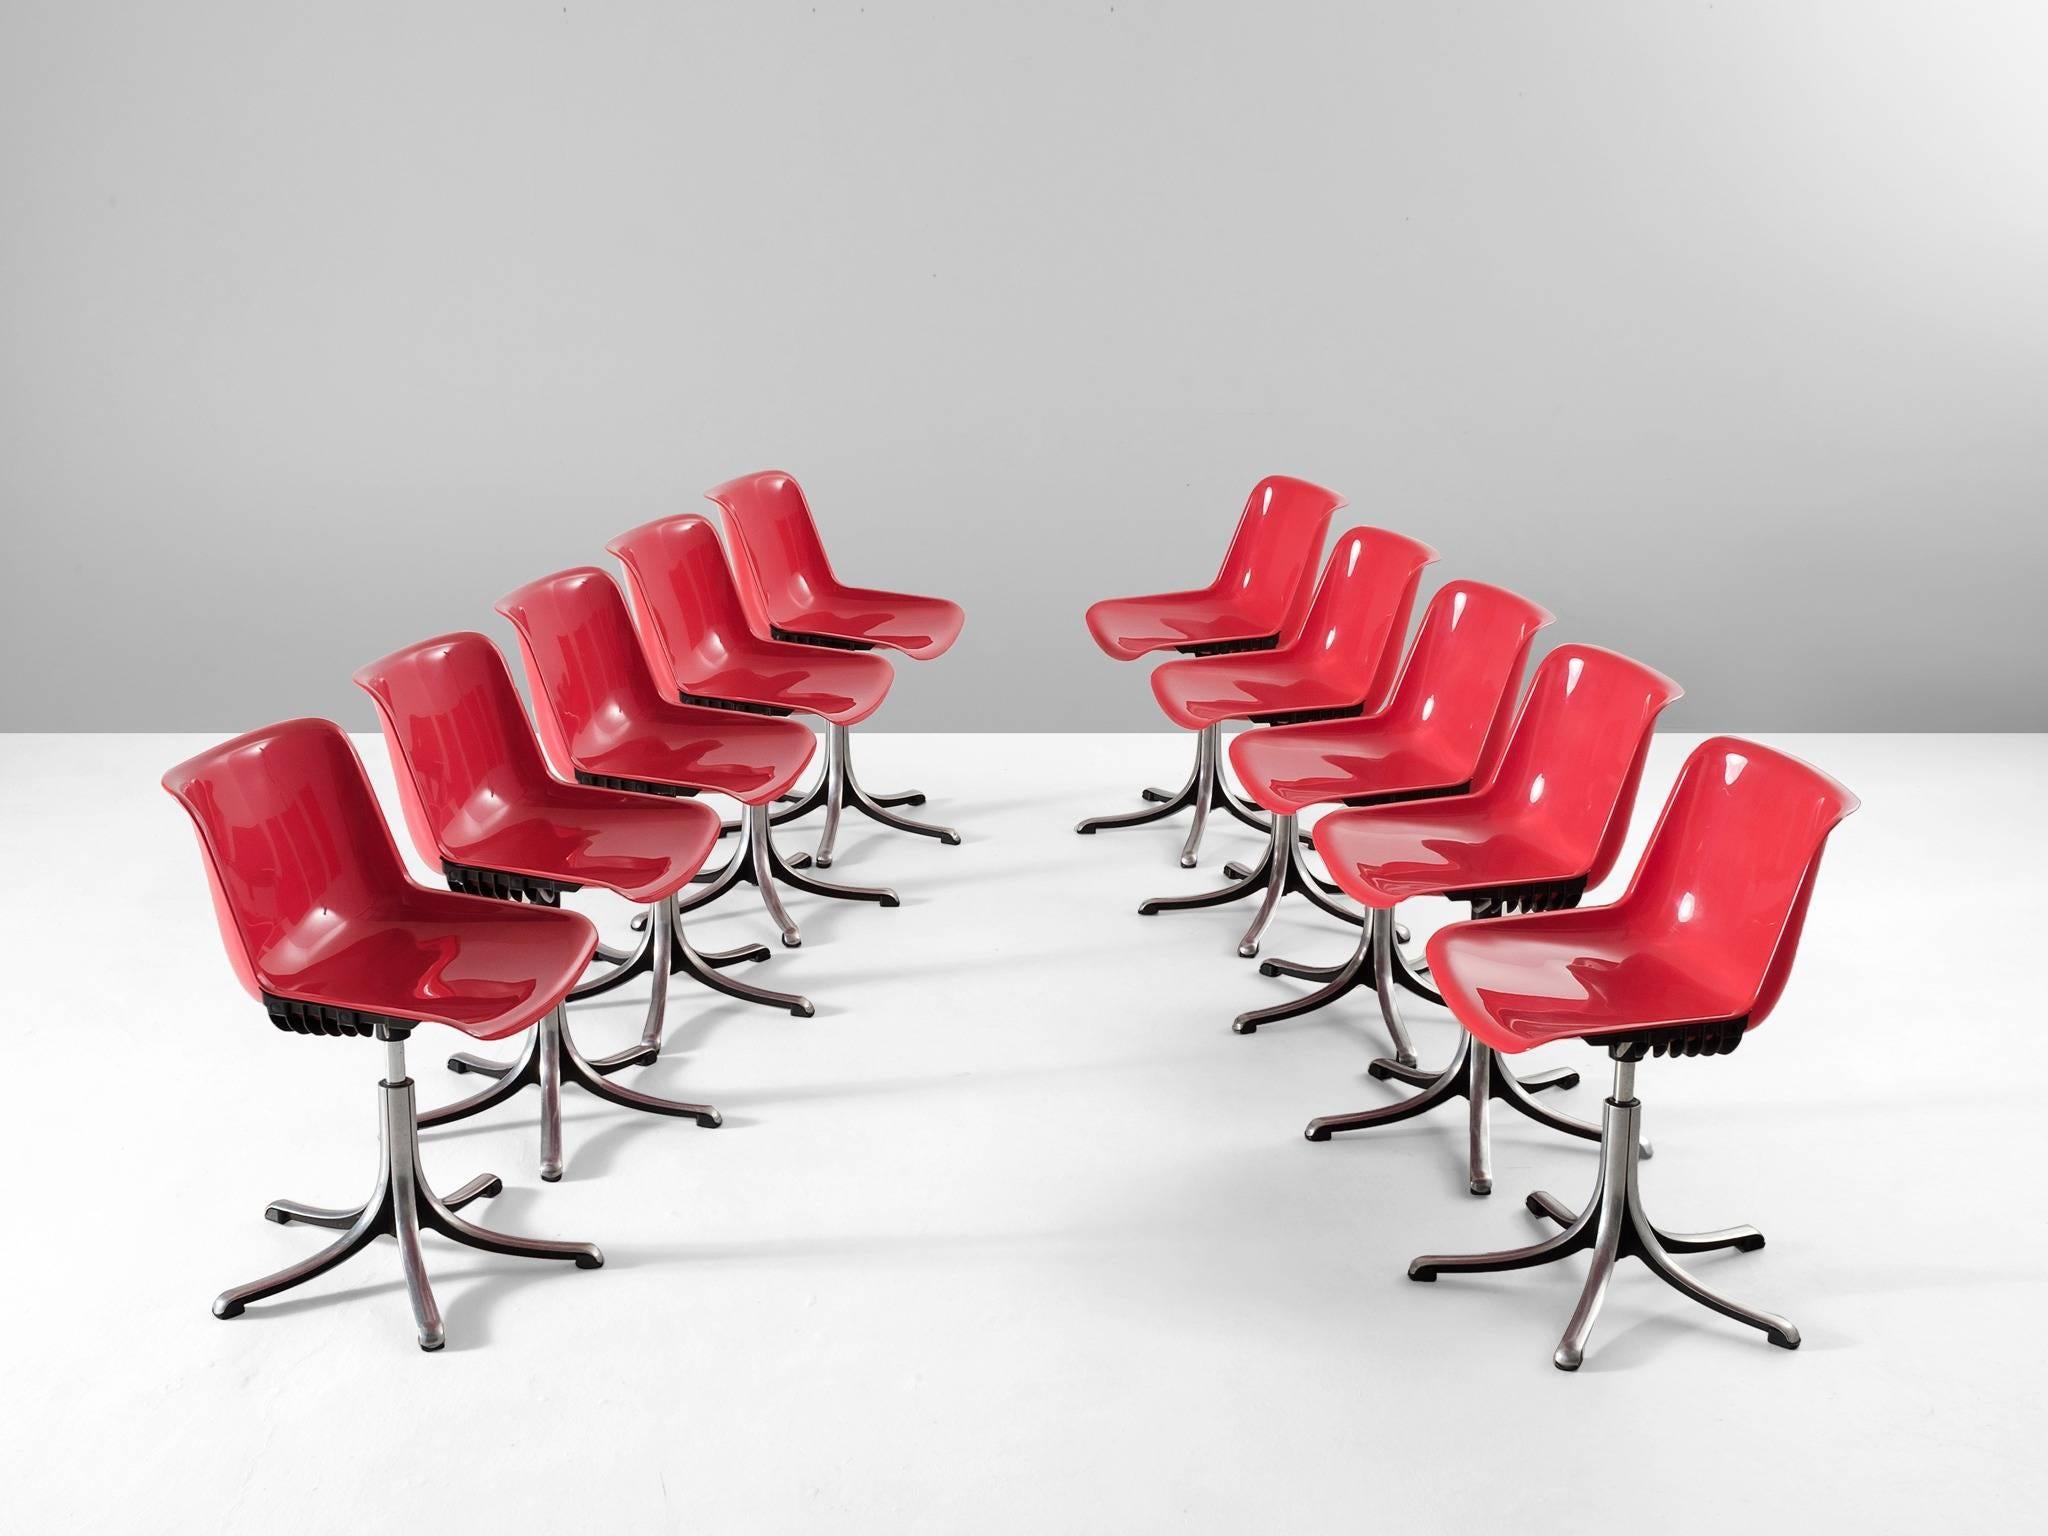 Set of ten chairs model 'Modus', in cast aluminum and polypropylene, for Tecno, Italy, 1972.

The Modus chair was designed as a highly versatile item for the many different uses of furnishing: a desk chair, a seat for waiting rooms or auditoriums